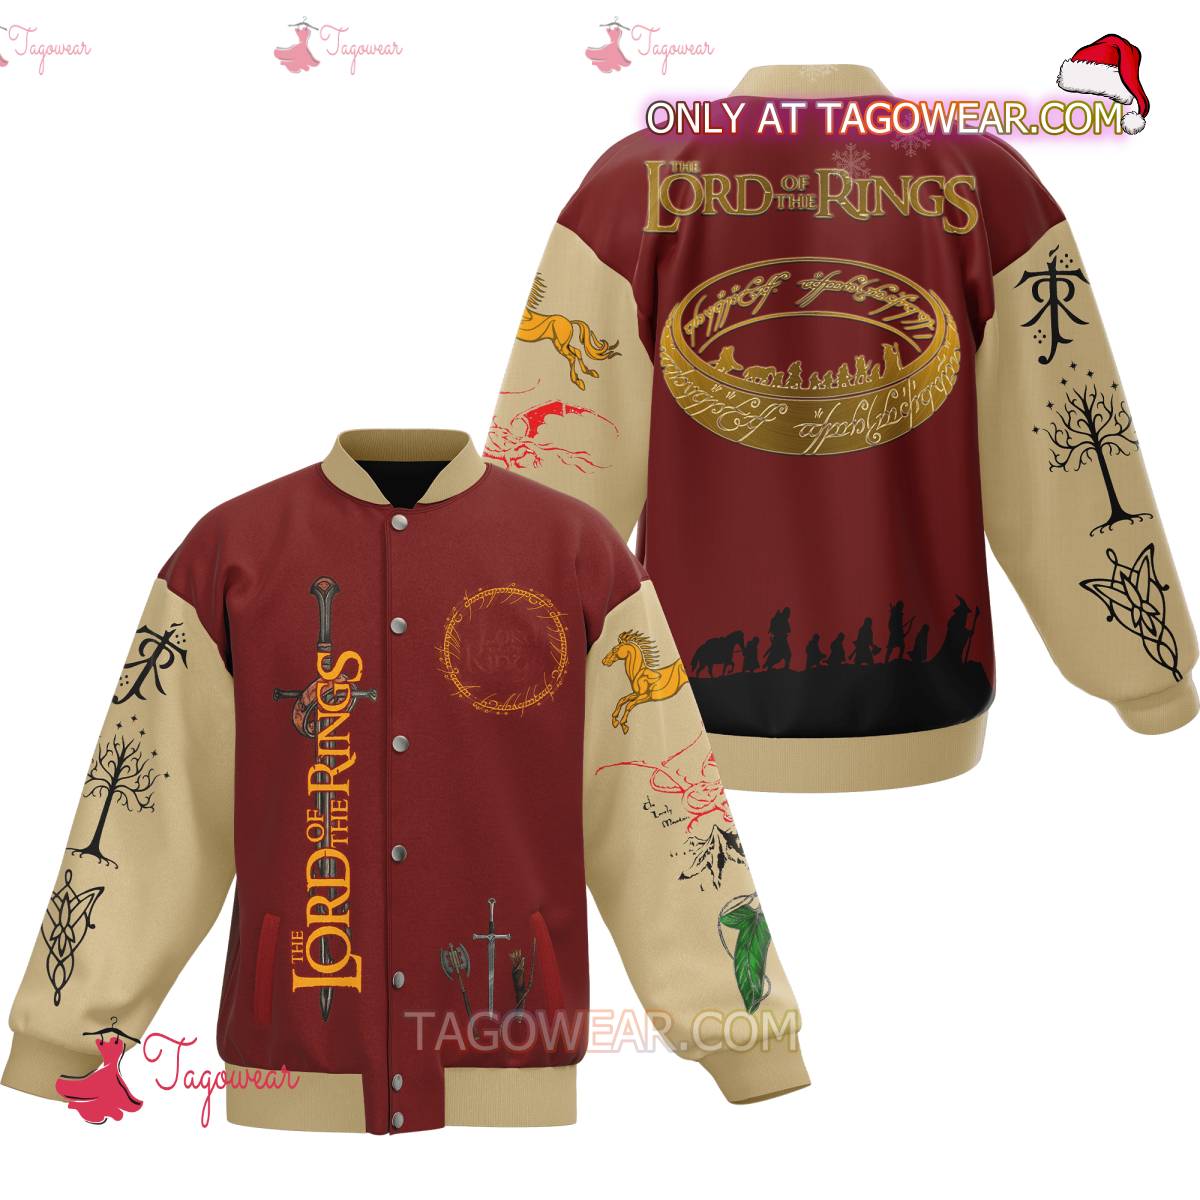 The Lord Of The Rings Baseball Jacket